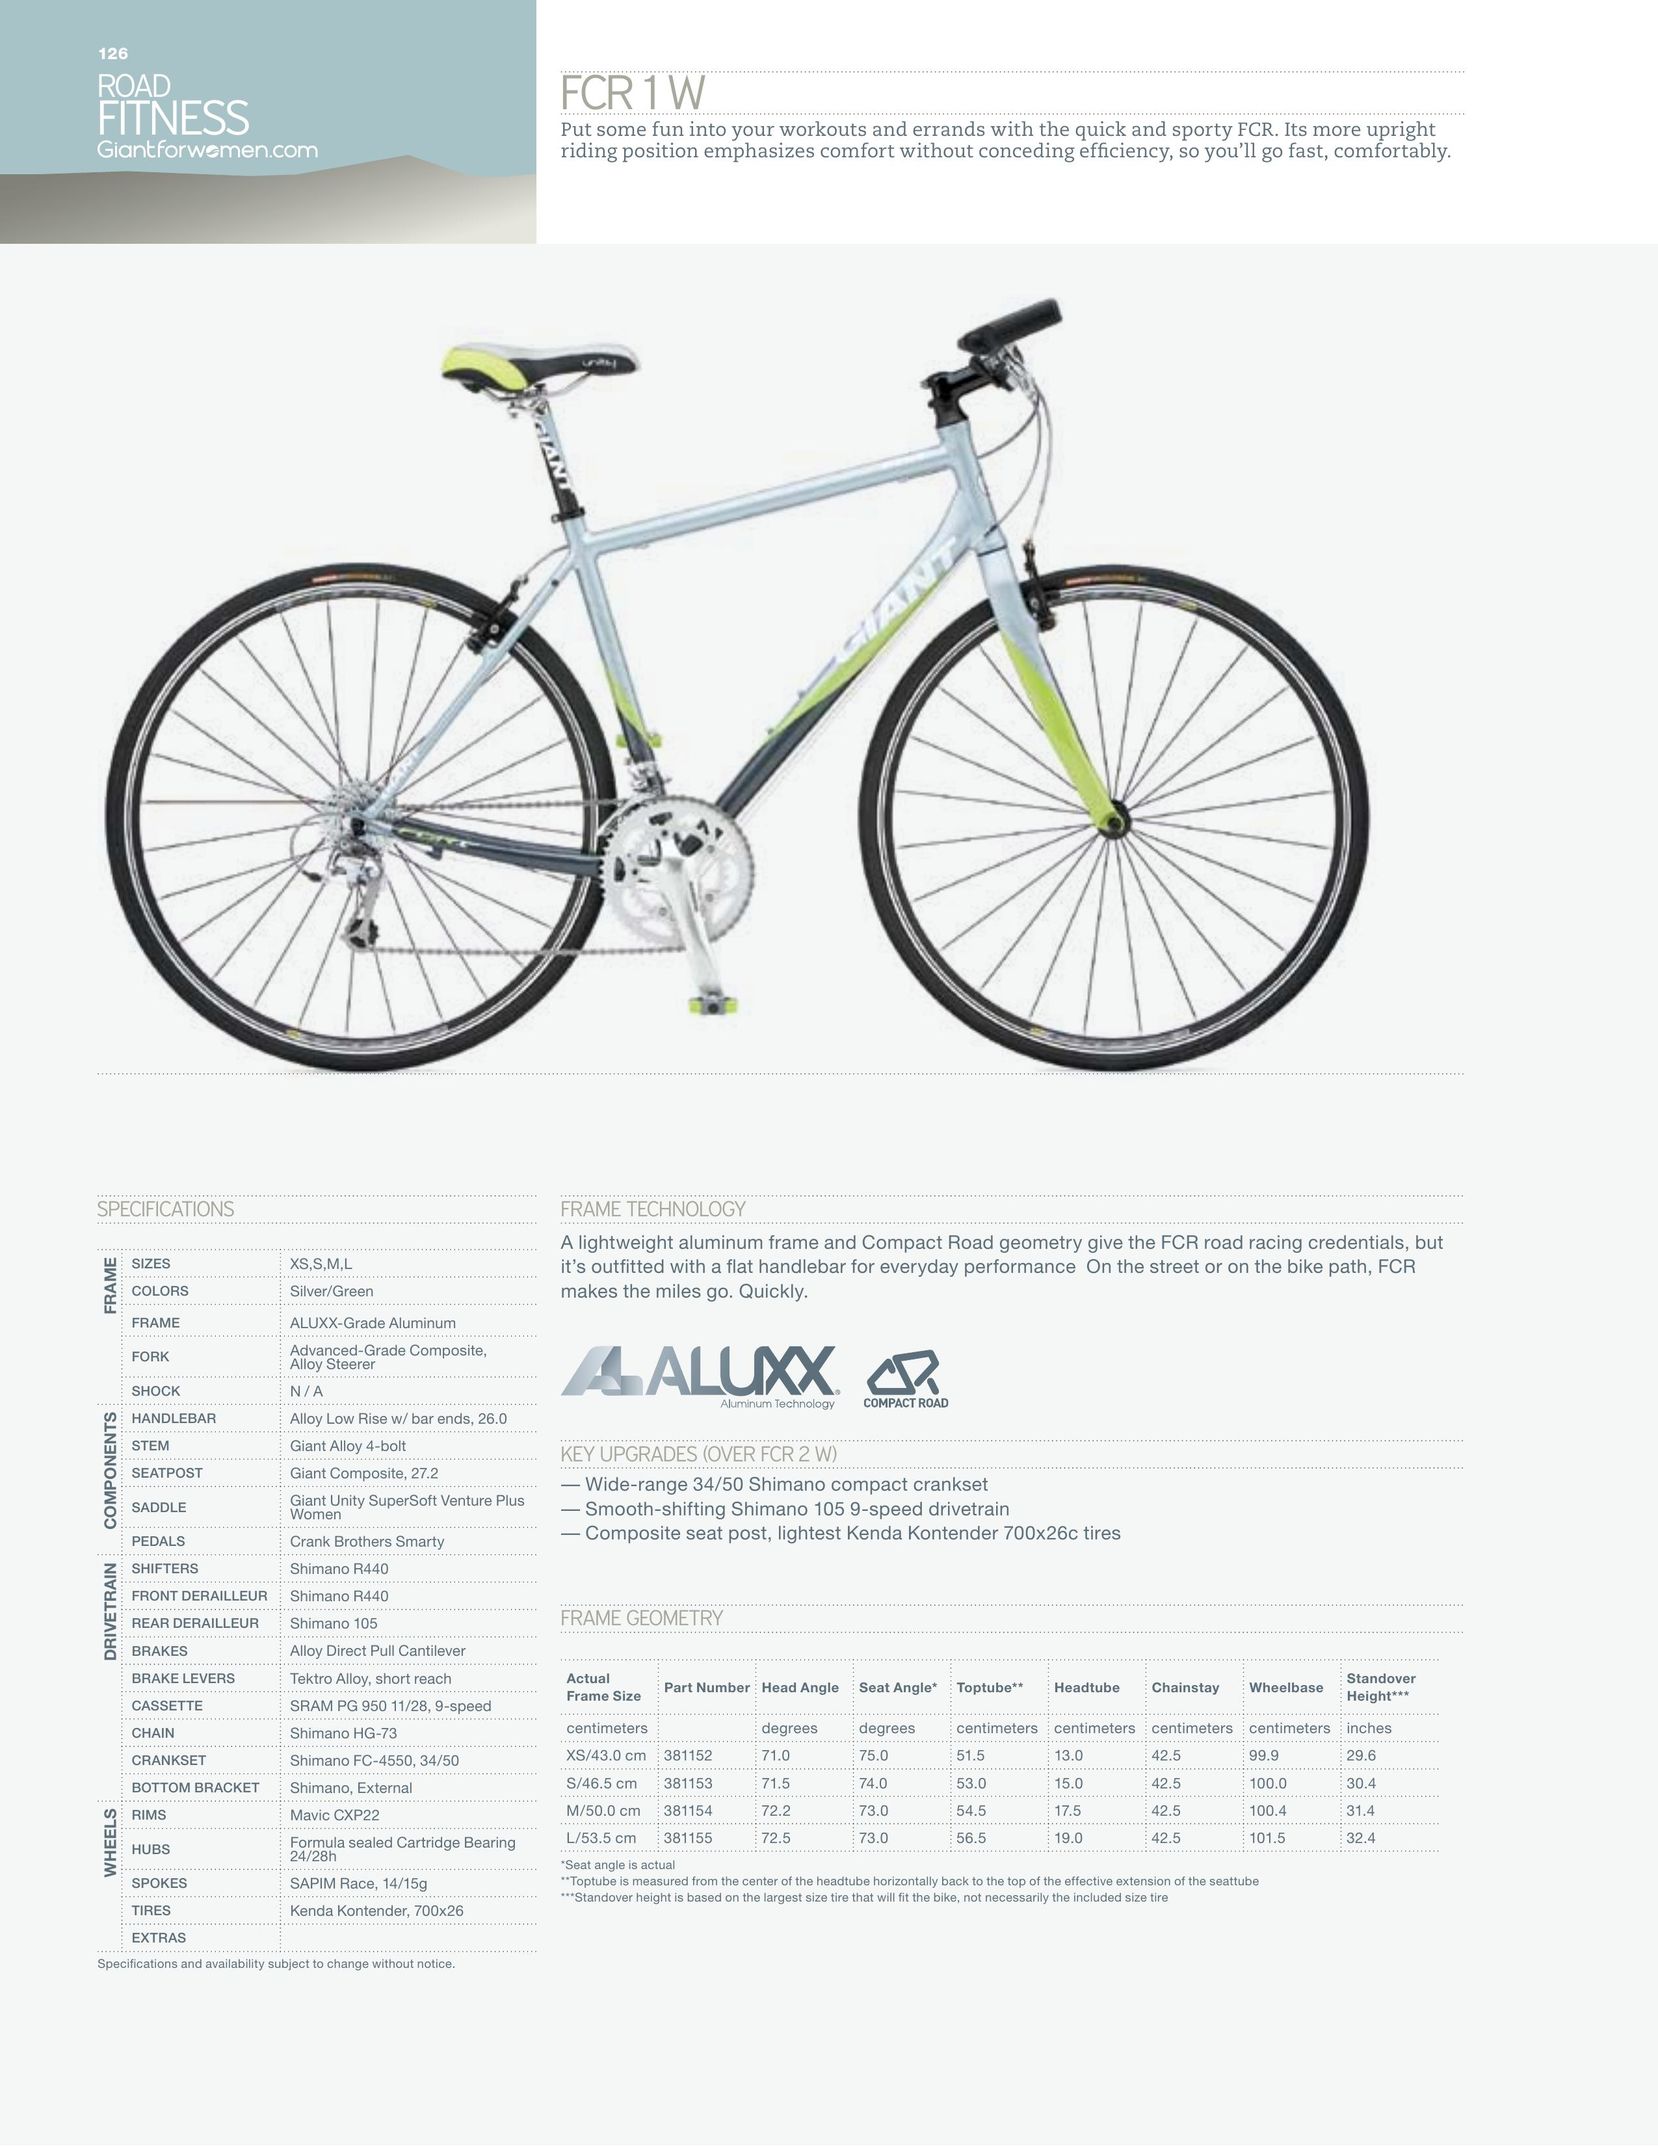 Giant FCR 1 W Bicycle User Manual